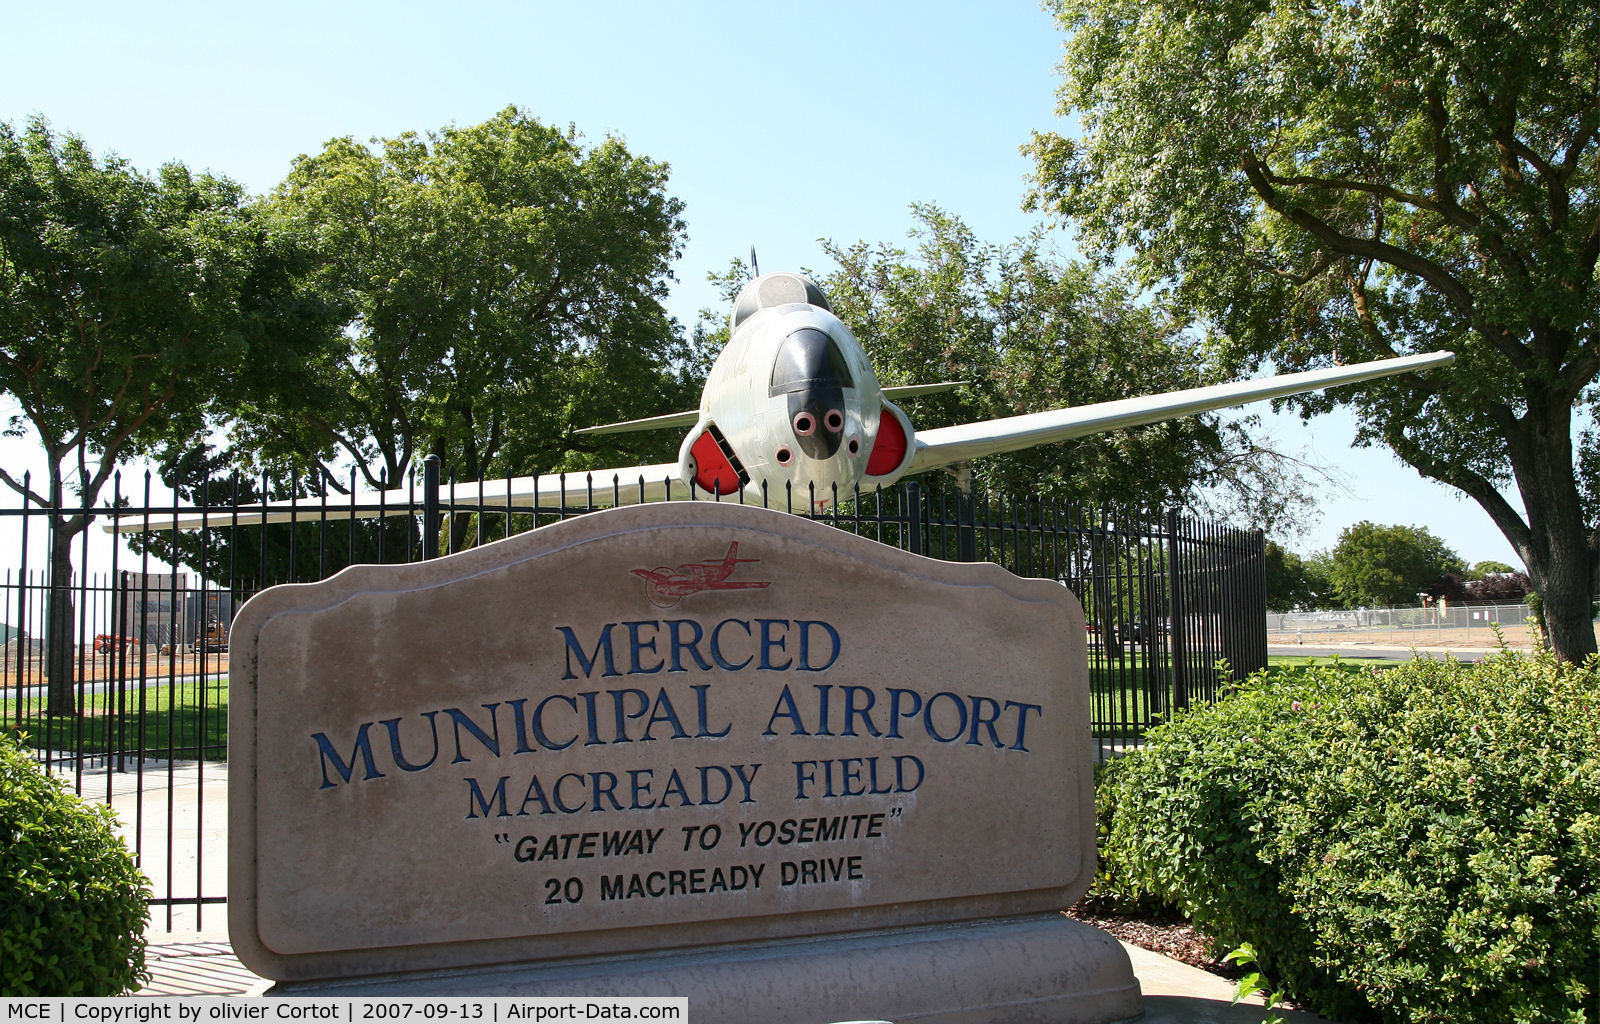 Merced Rgnl//macready Field Airport (MCE) - the front gate : you'll find a P-80 as gate guardian there